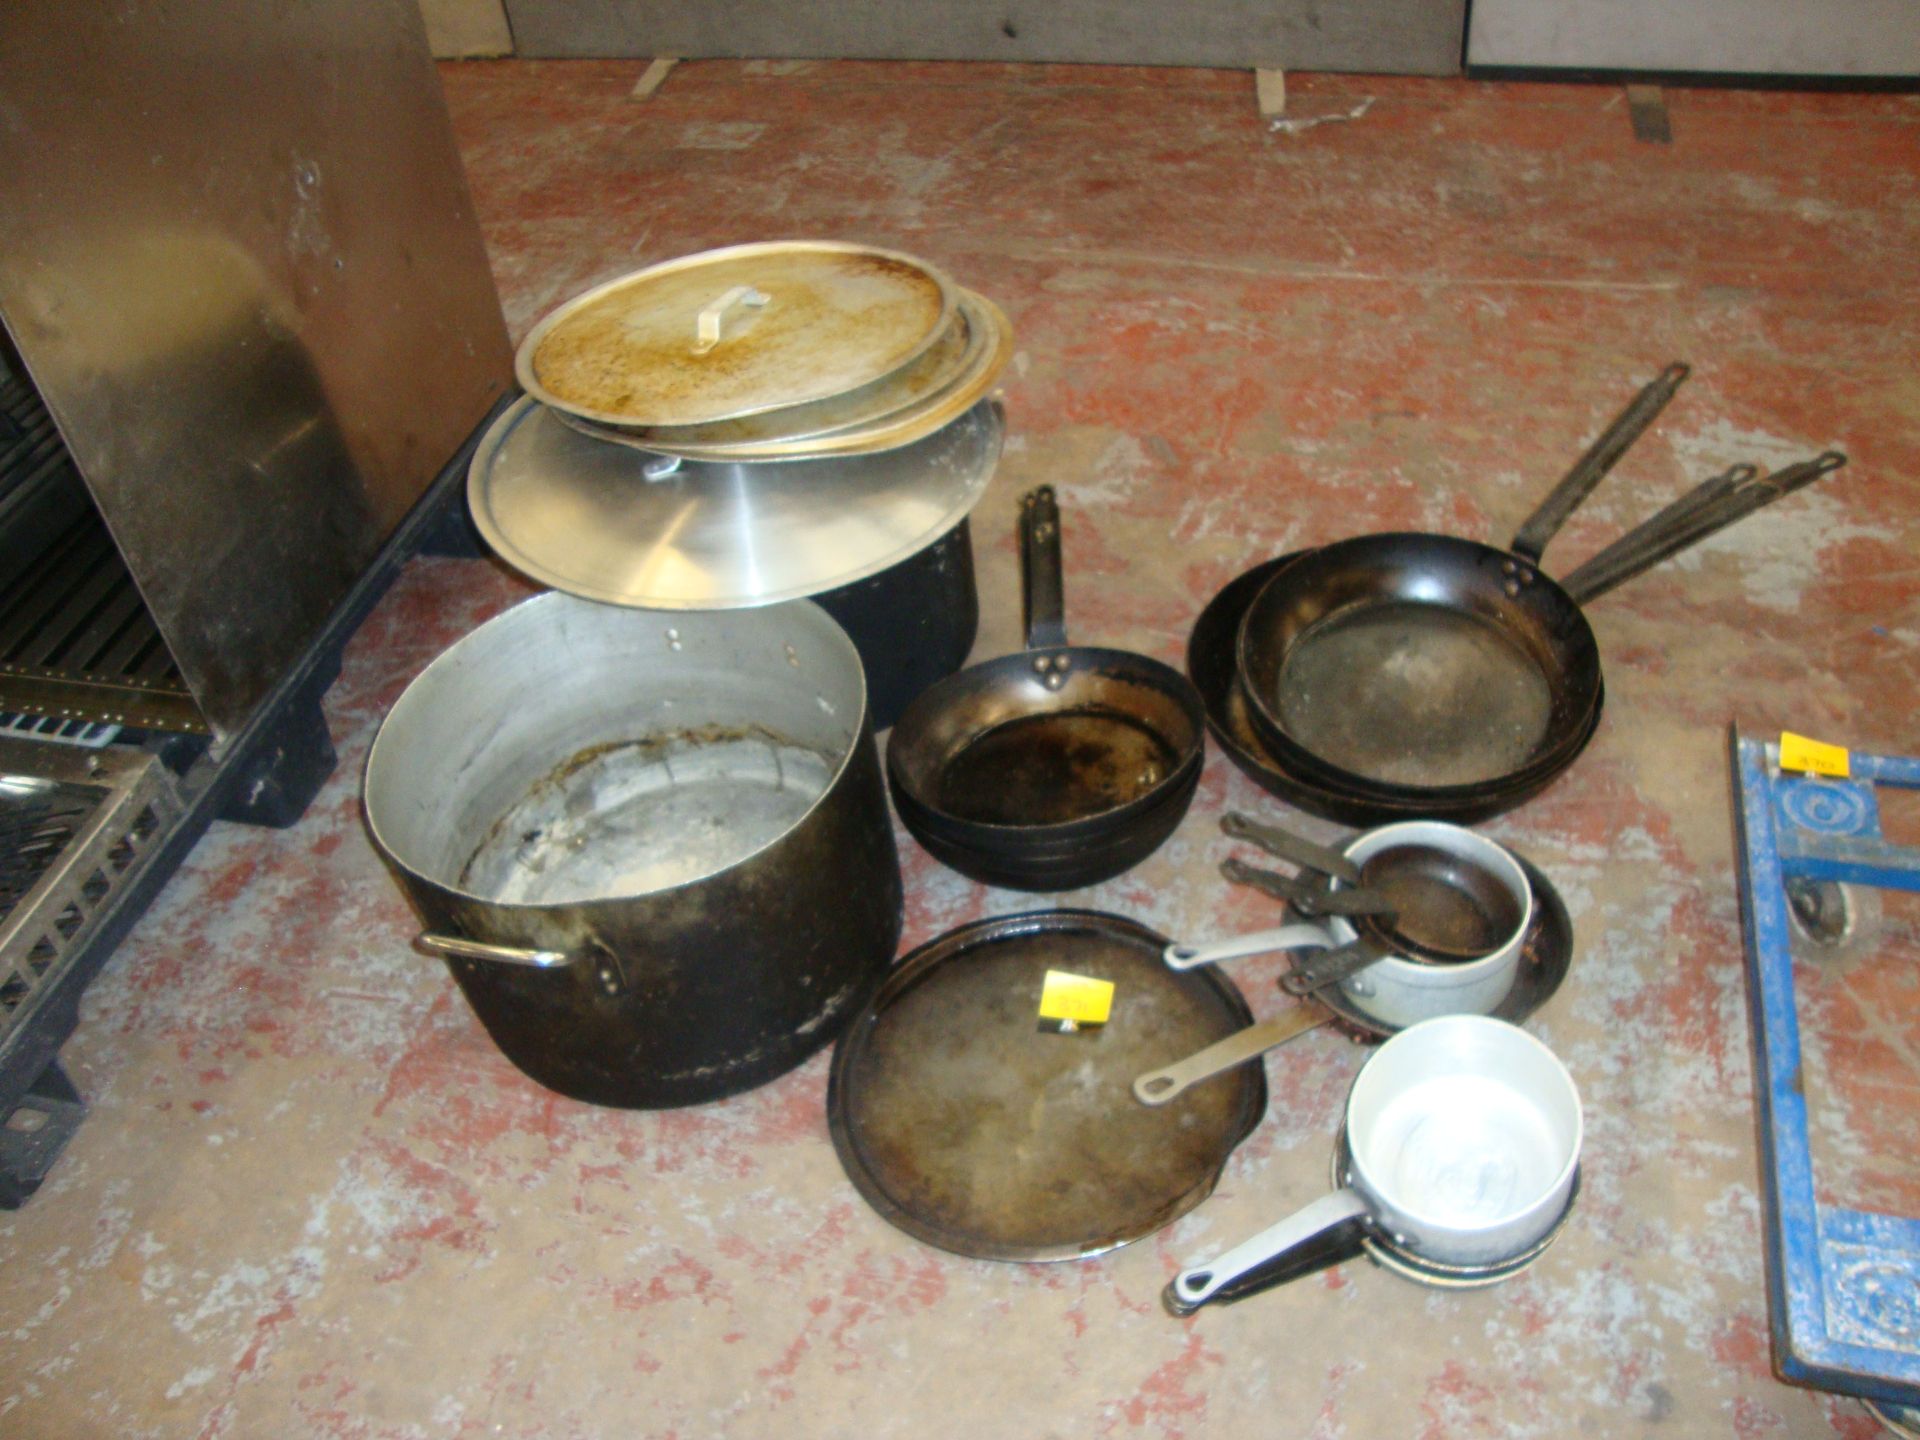 Quantity of pans as pictured